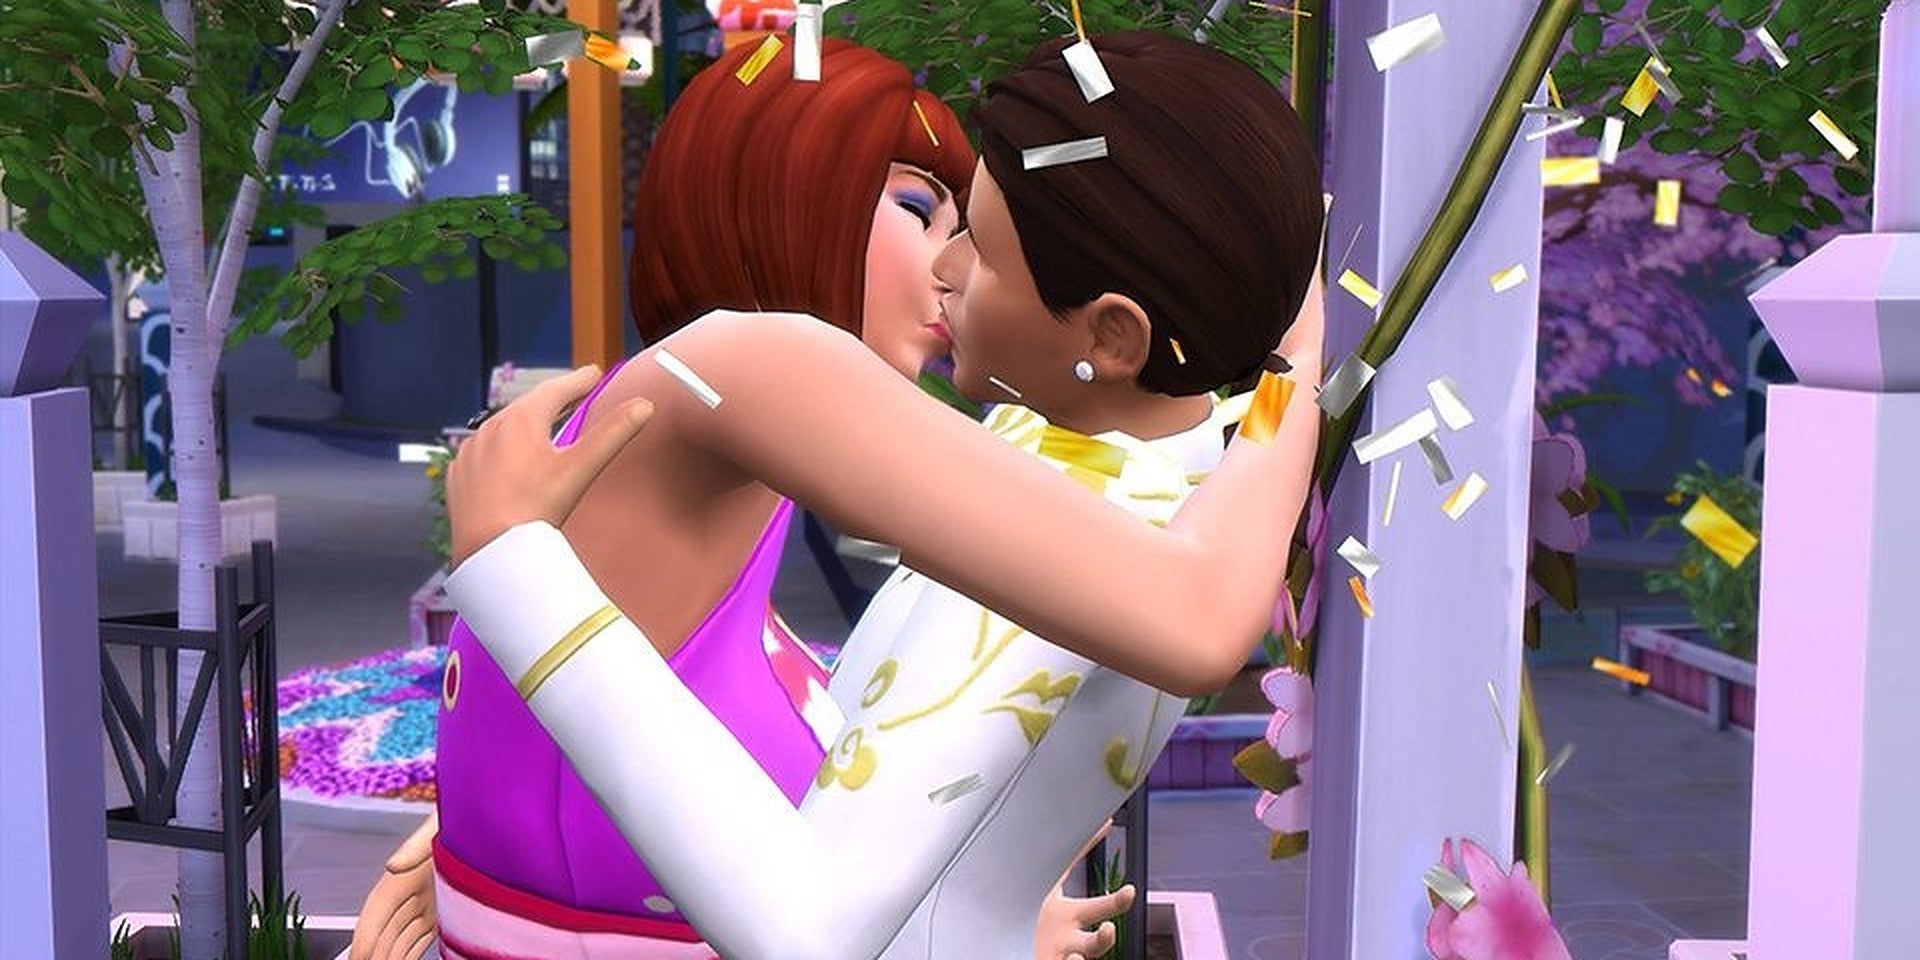 Two Sims kiss in The Sims 4.